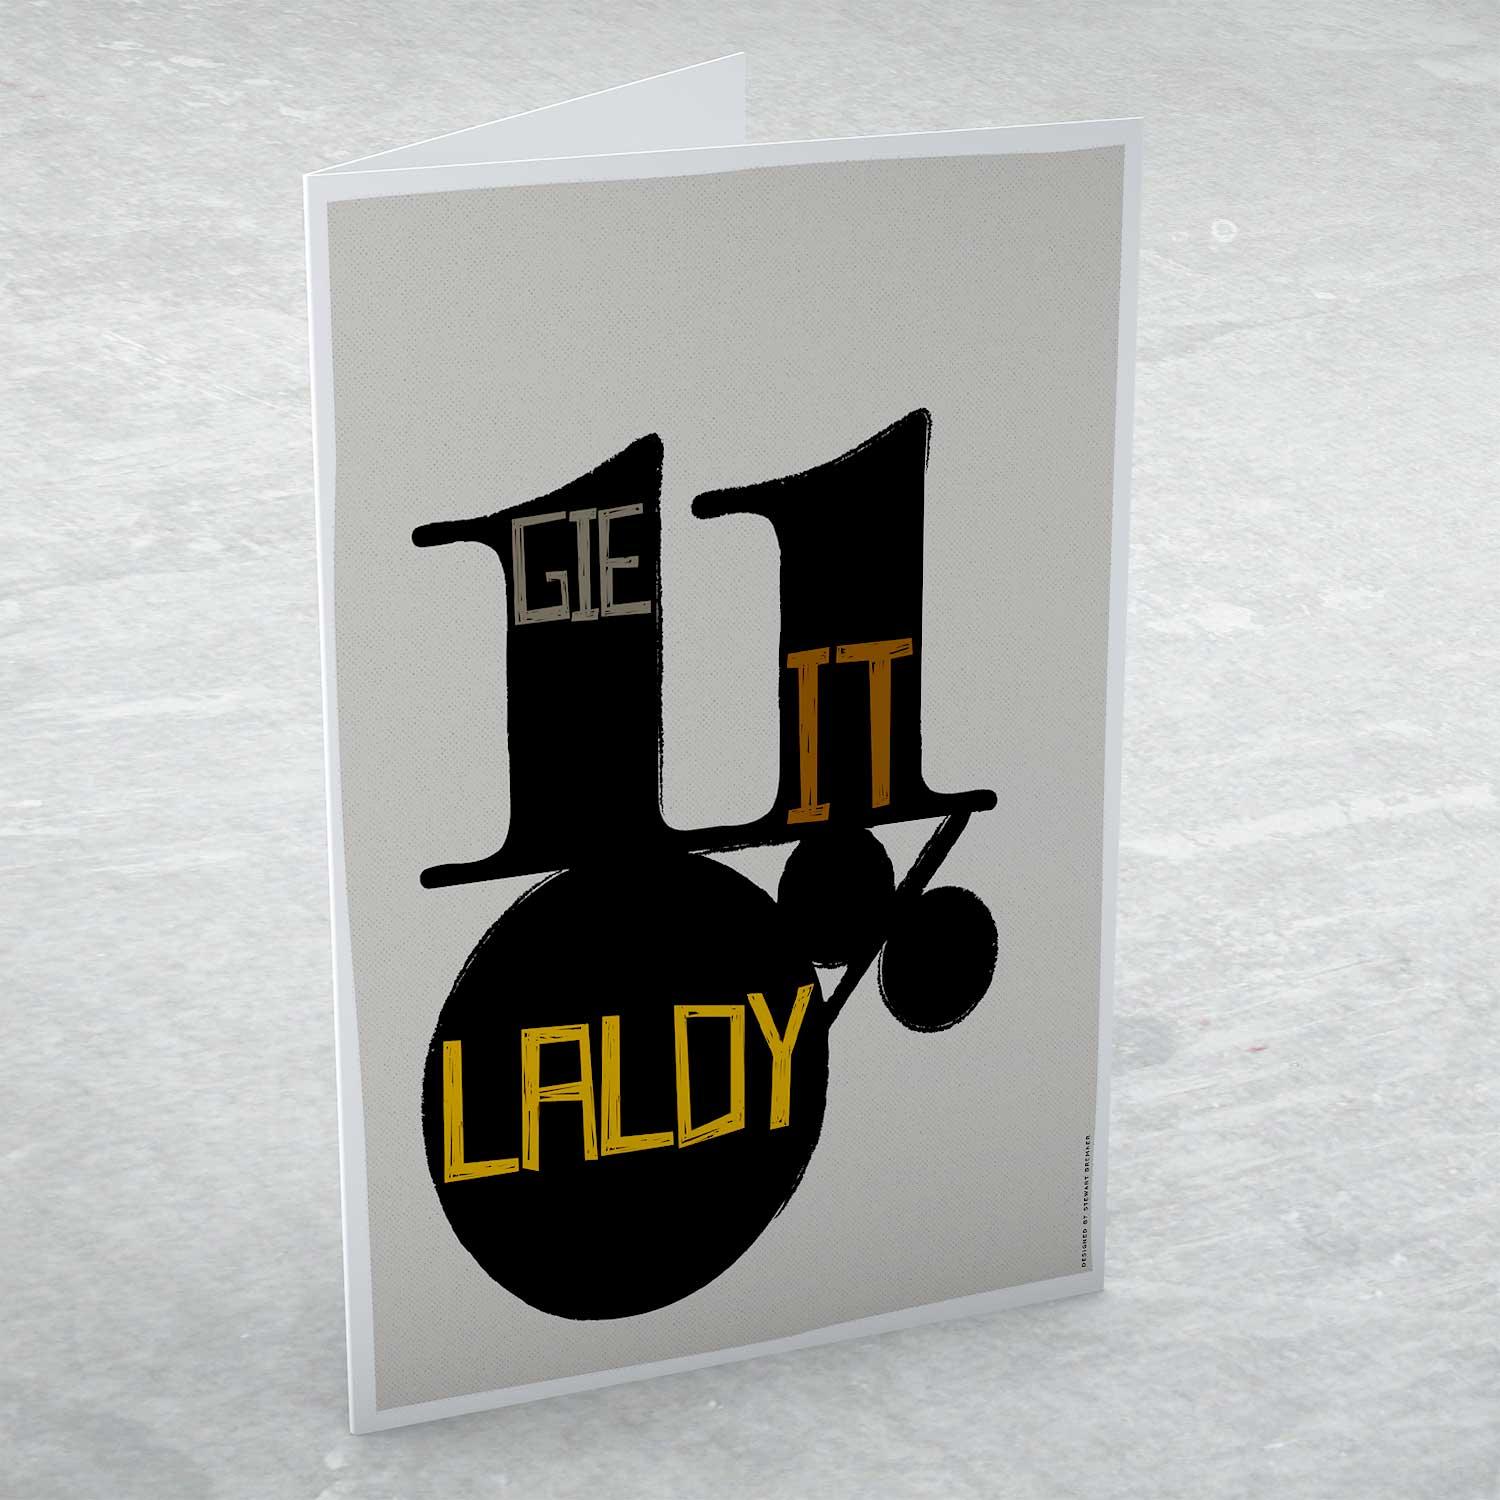 Gie it Laldy Greeting Card from an original painting by artist Stewart Bremner